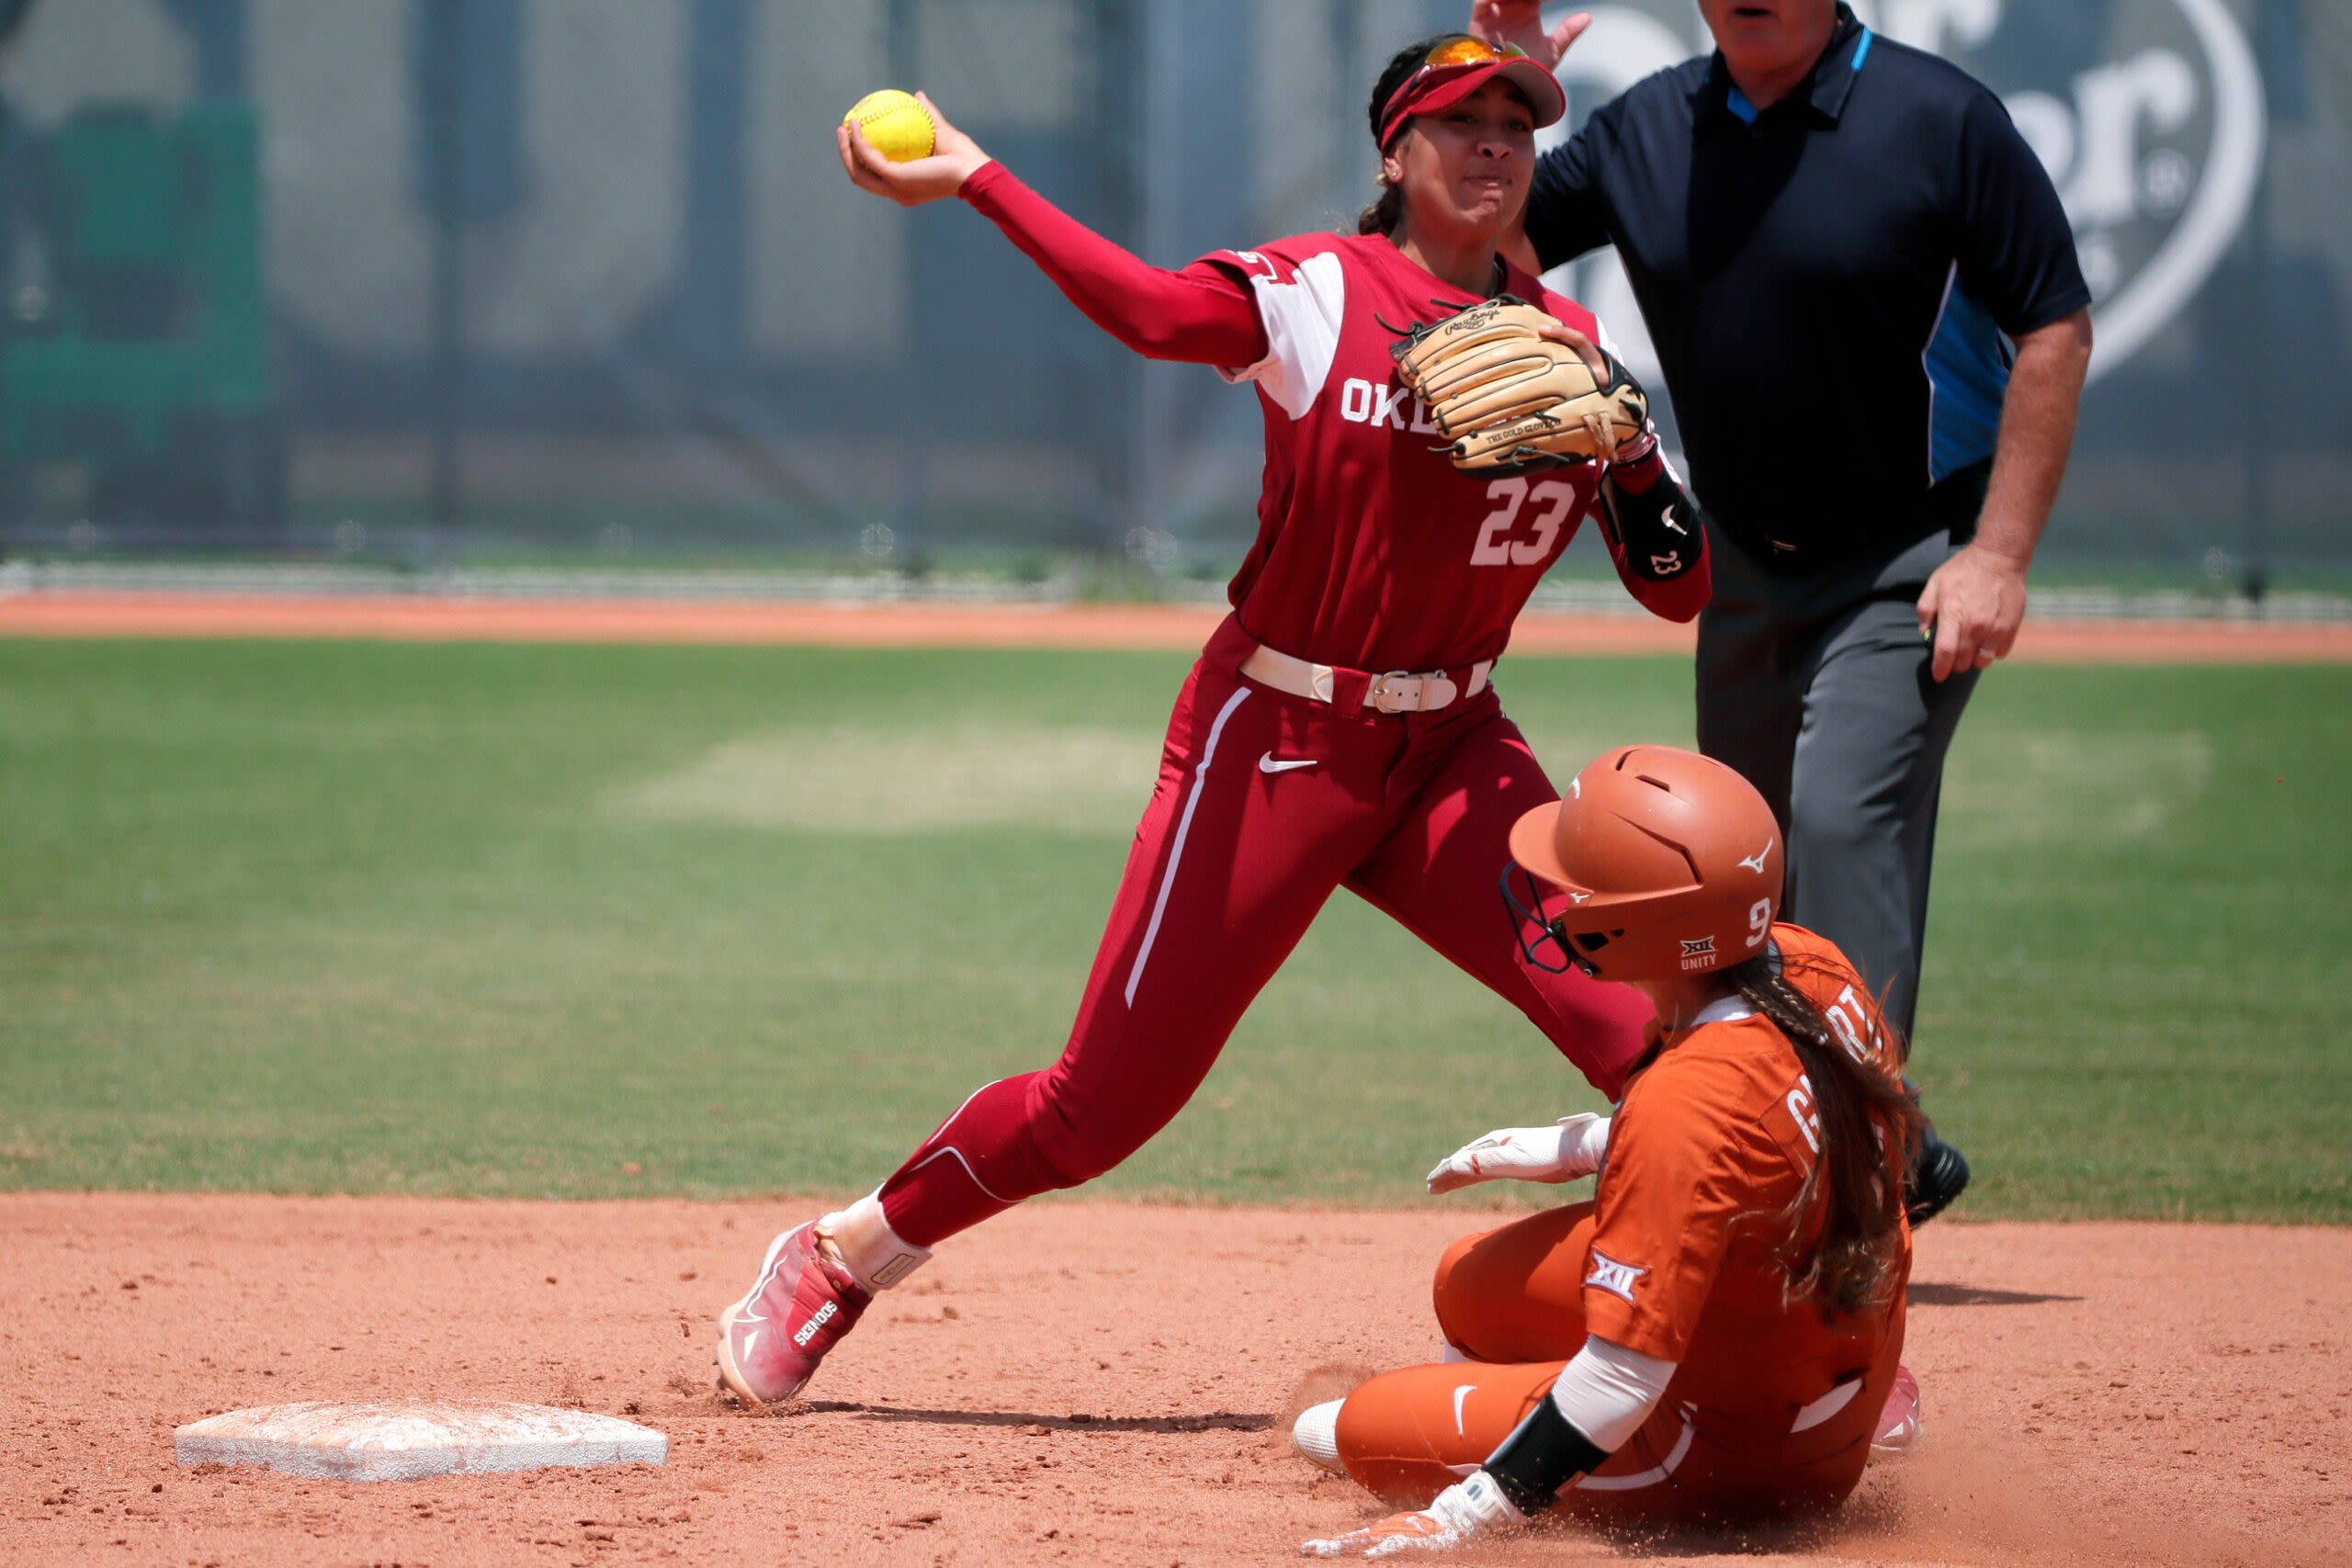 Texas softball HC Mike White wants Women’s College World Series moved